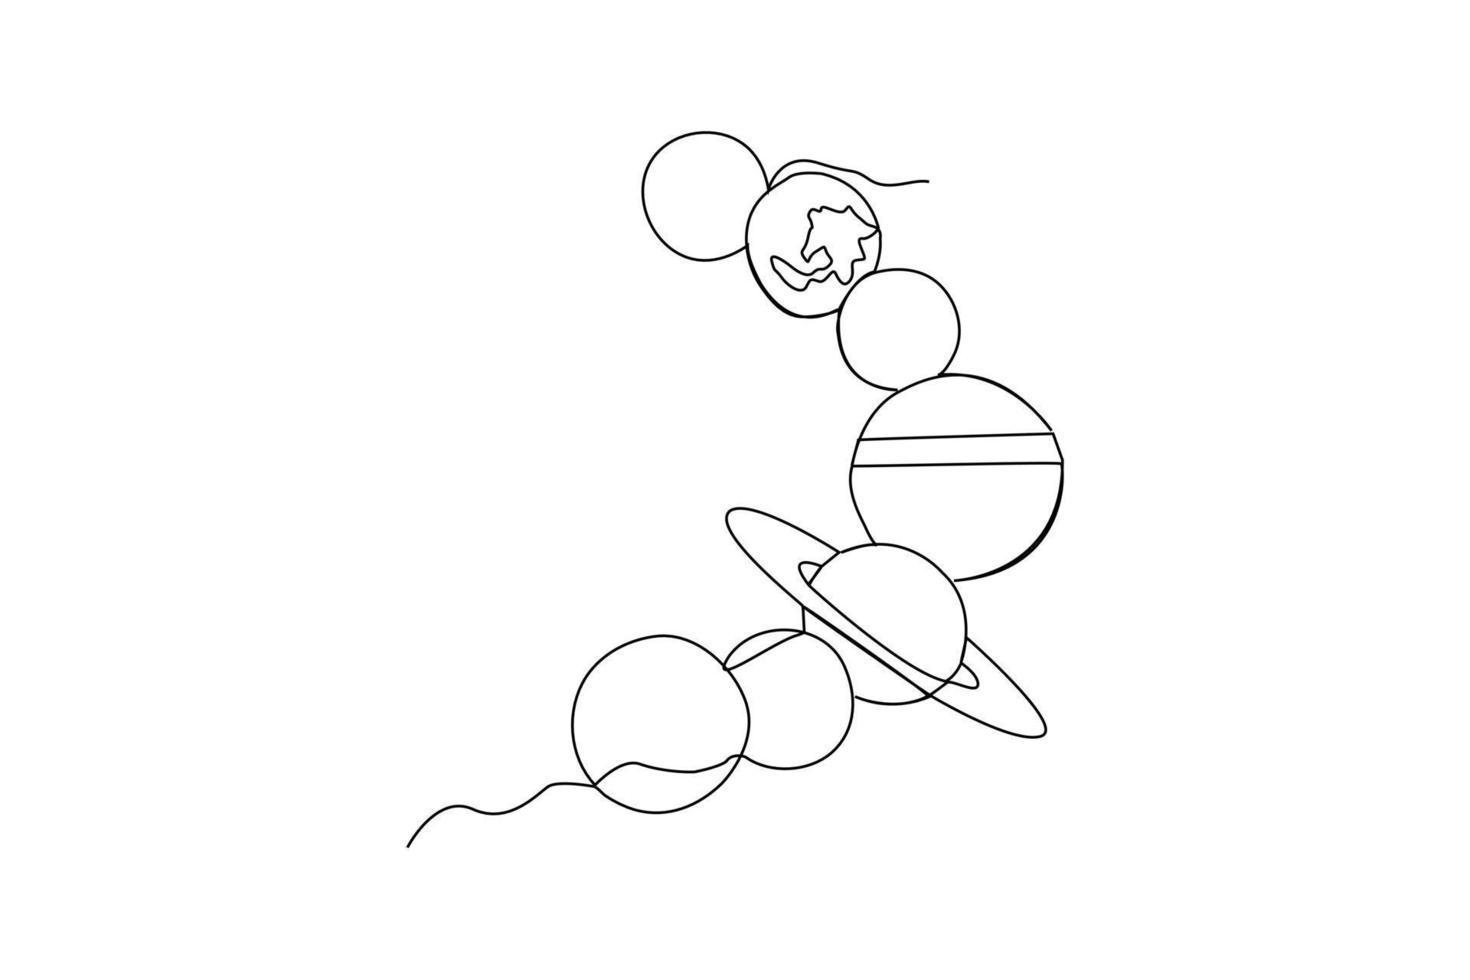 Continuous one line drawing arrangement of planets in space. space concept. Single line draw design vector graphic illustration.